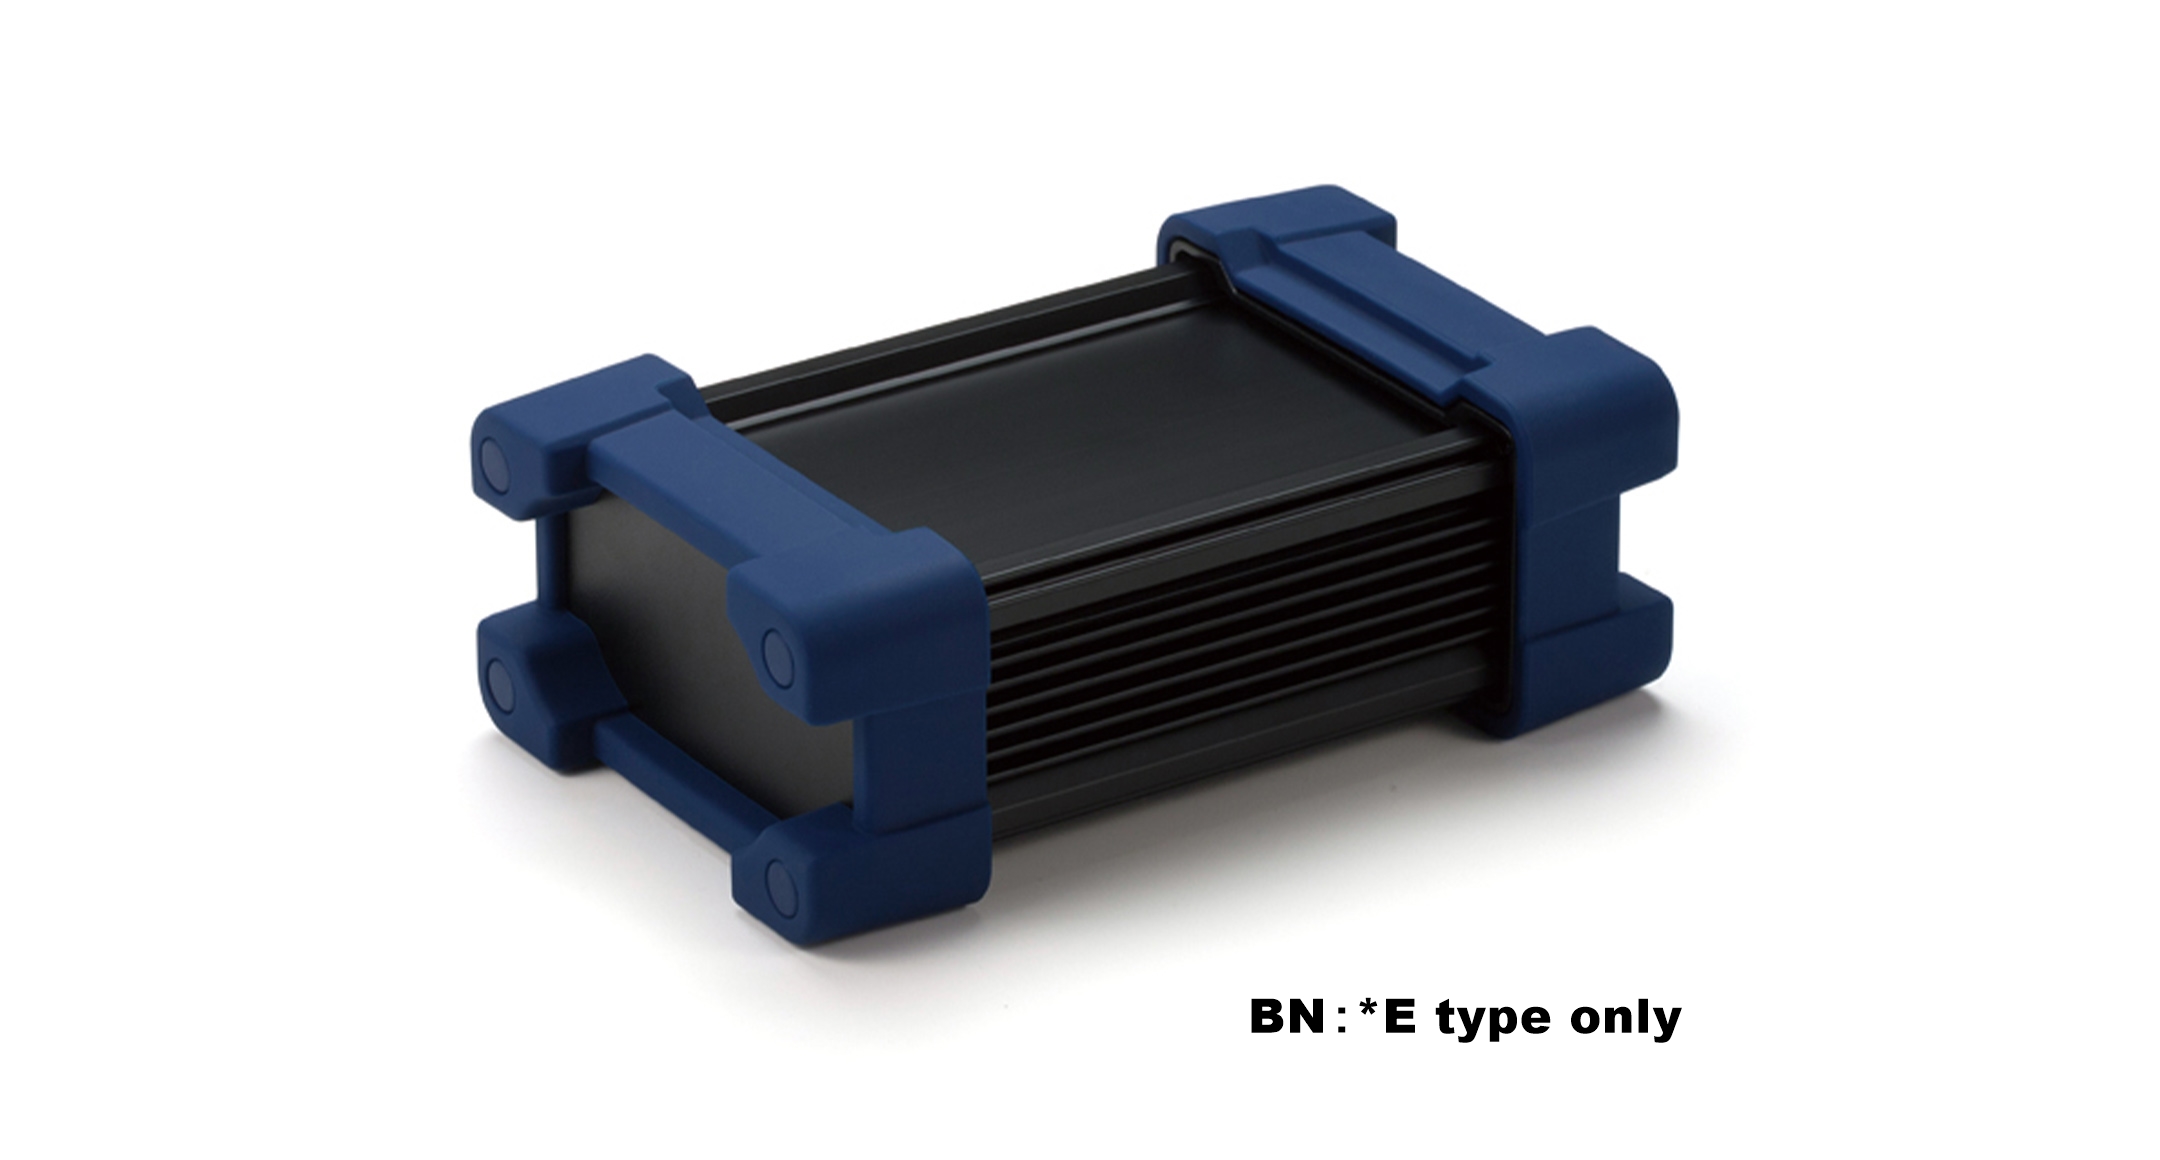 IP68 ALUMINUM ENCLOSURE with SILICONE PROTECTOR - AWP series:Black/Navy